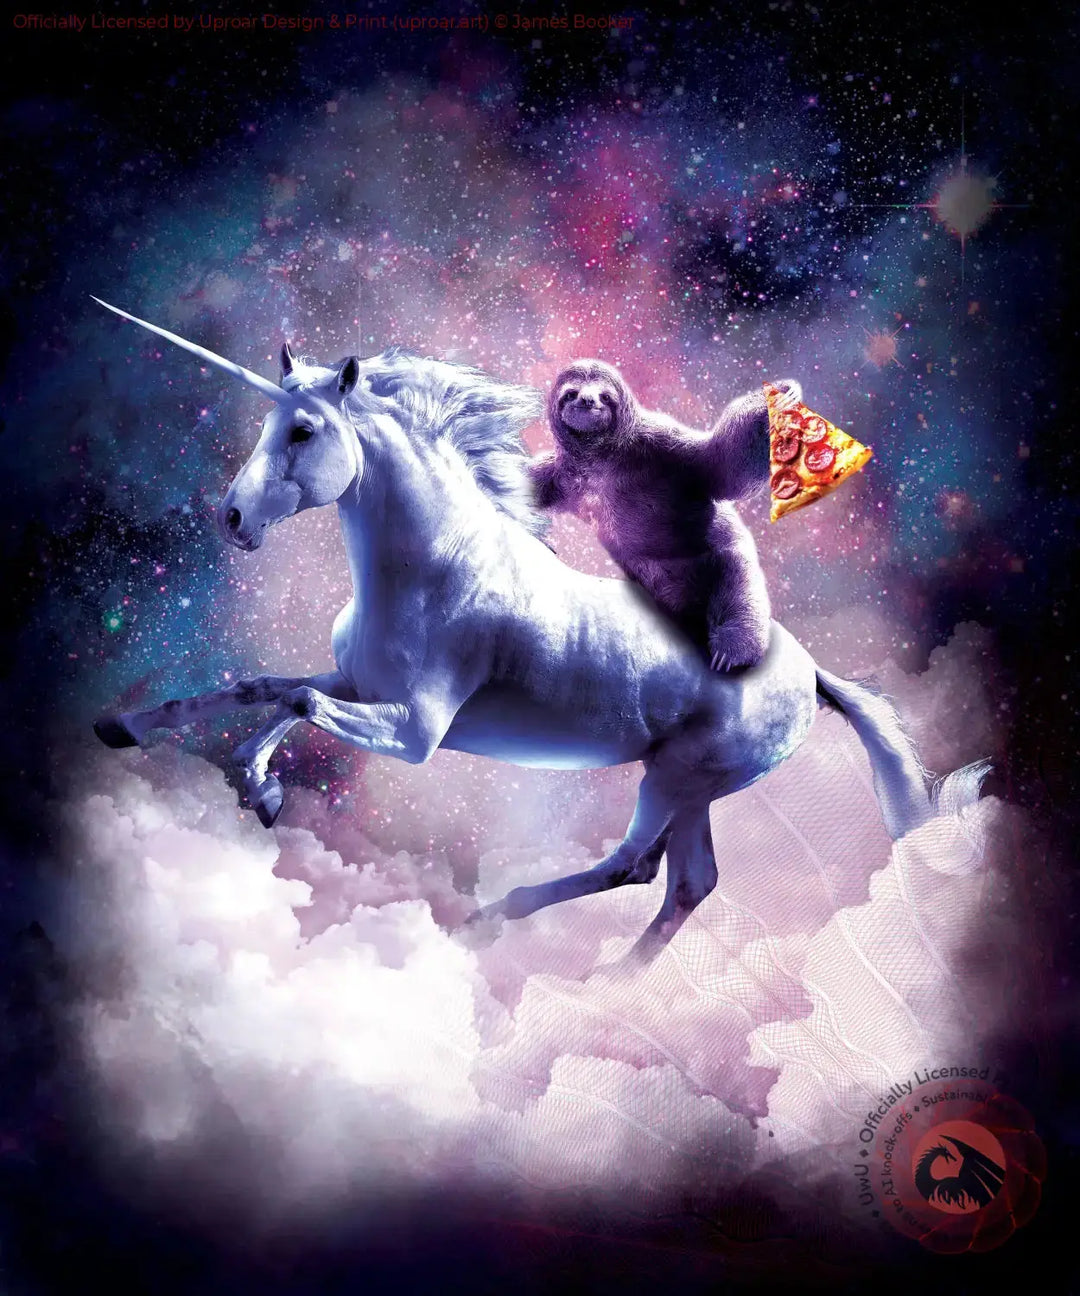 Space Sloth On Unicorn - Sloth Pizza James Booker